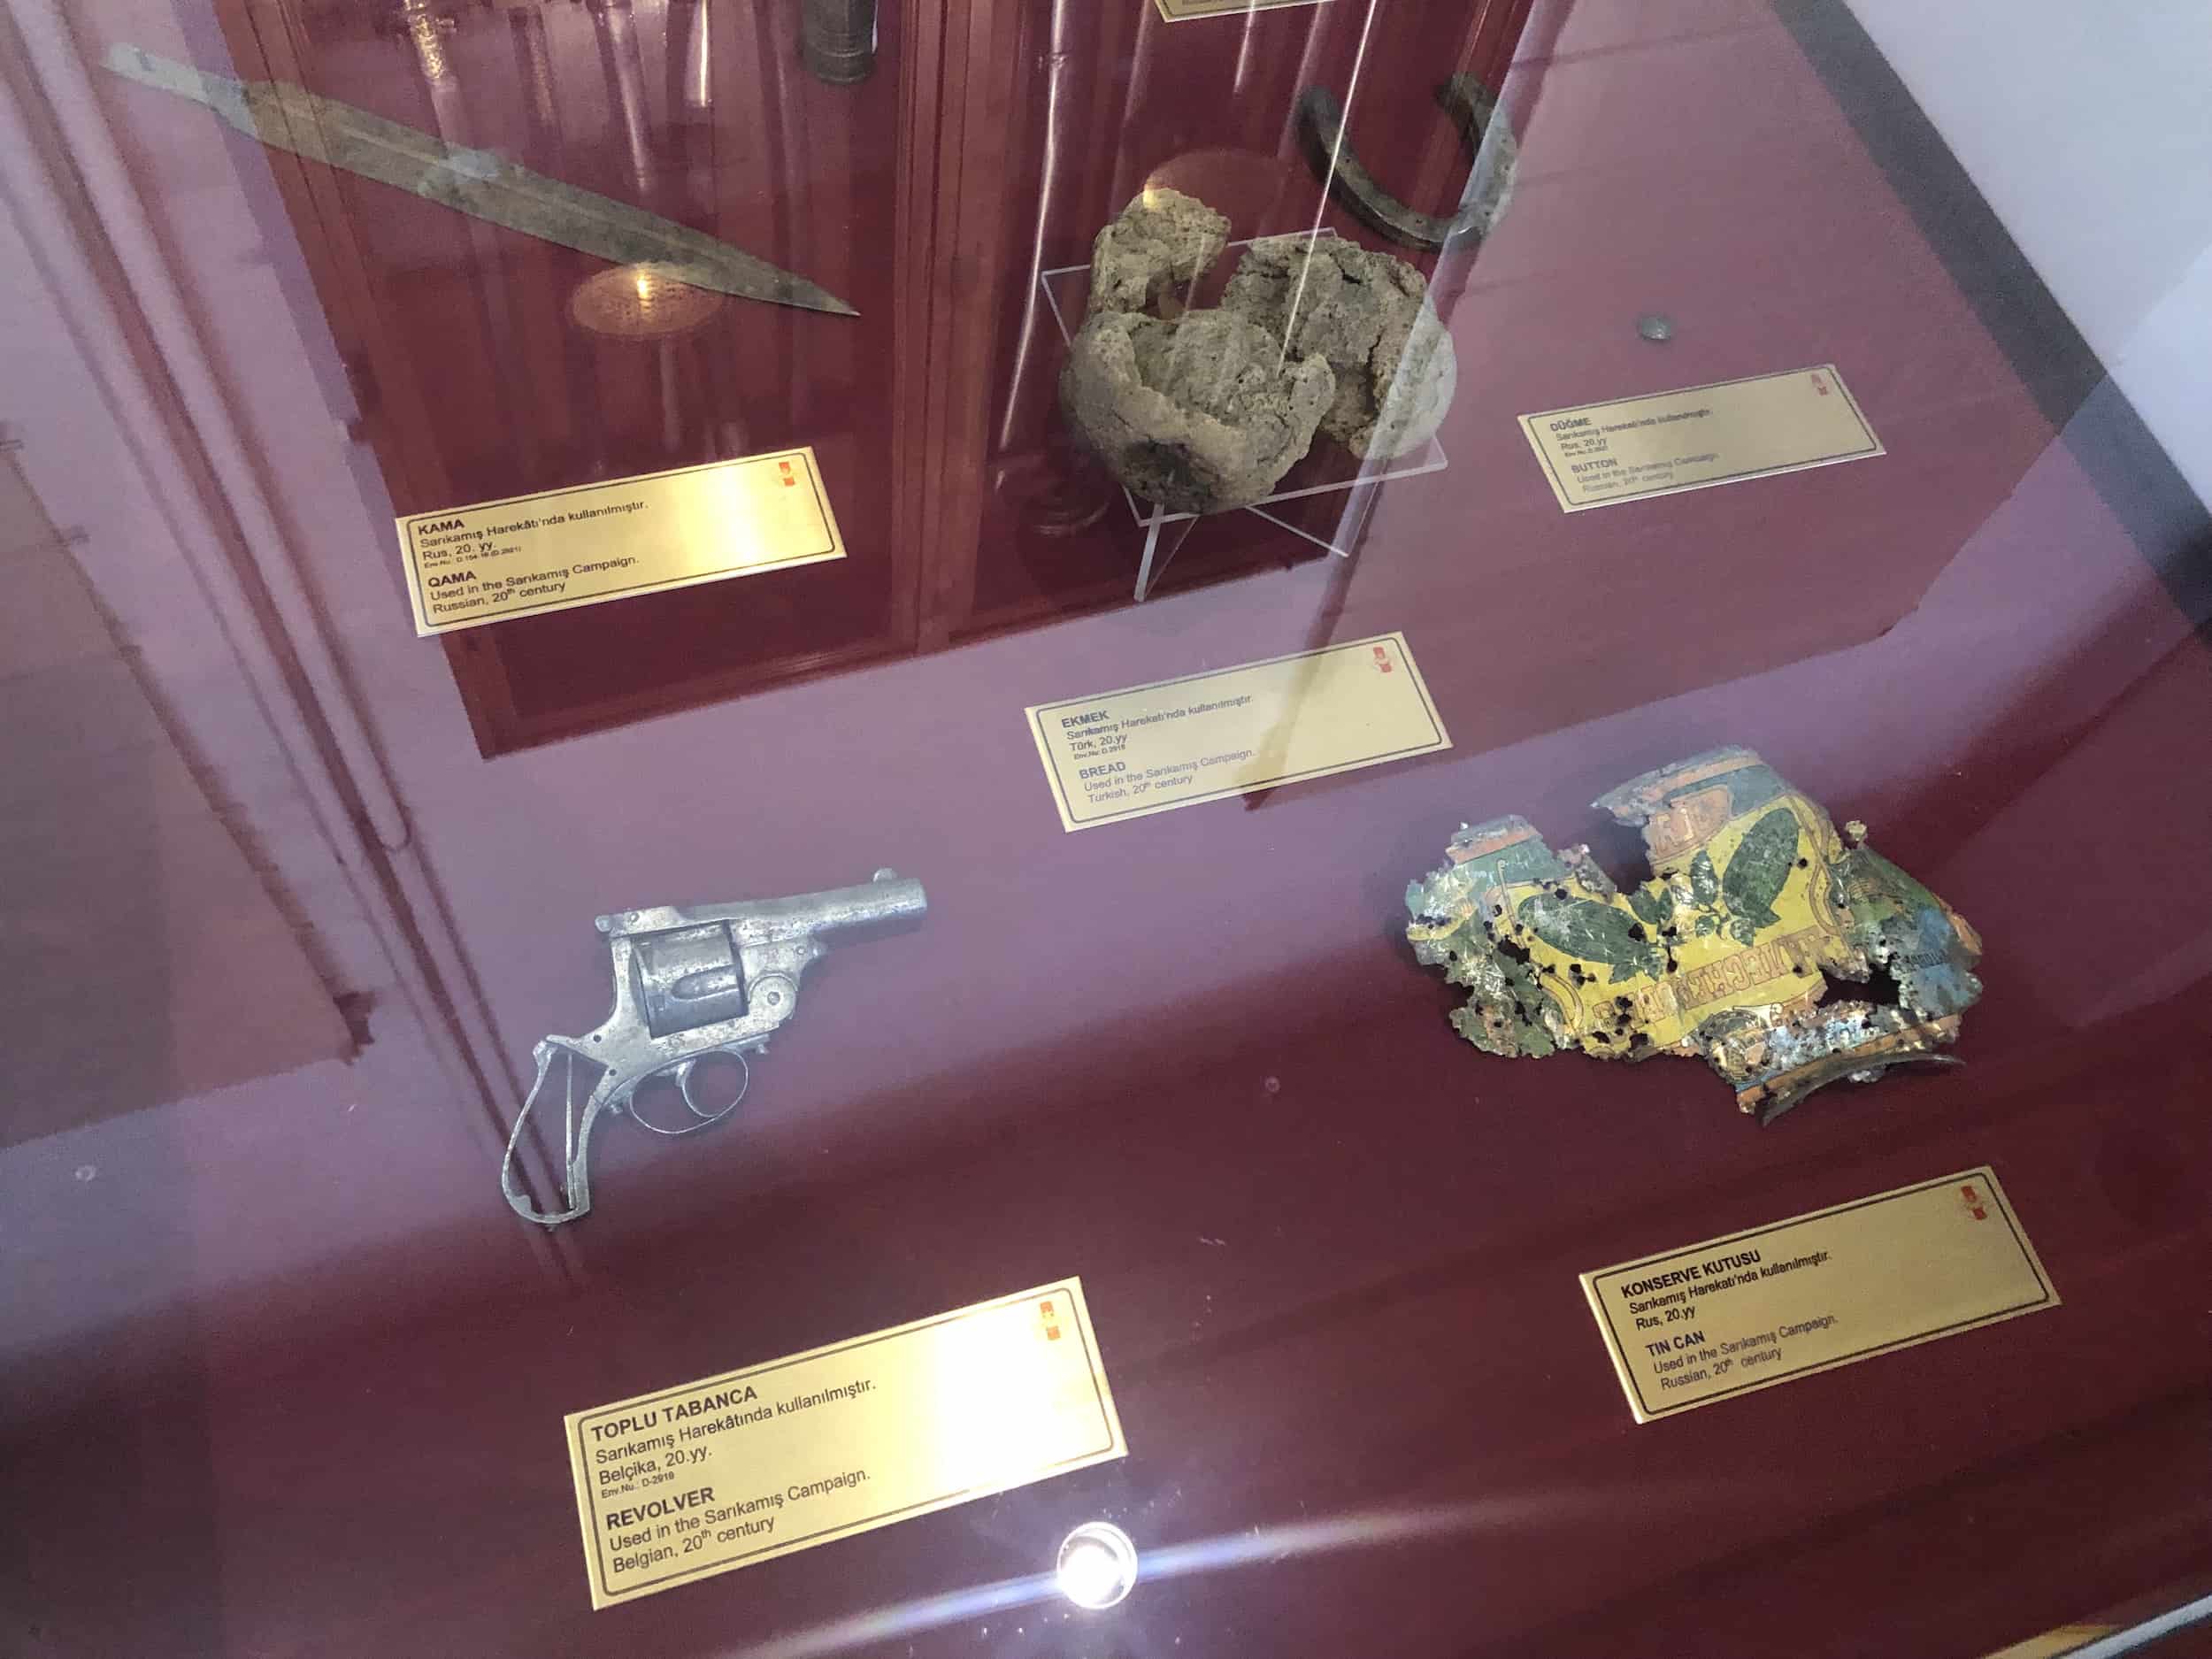 Artifacts from the Sarıkamış Campaign in the World War I Hall at the Harbiye Military Museum in Istanbul, Turkey